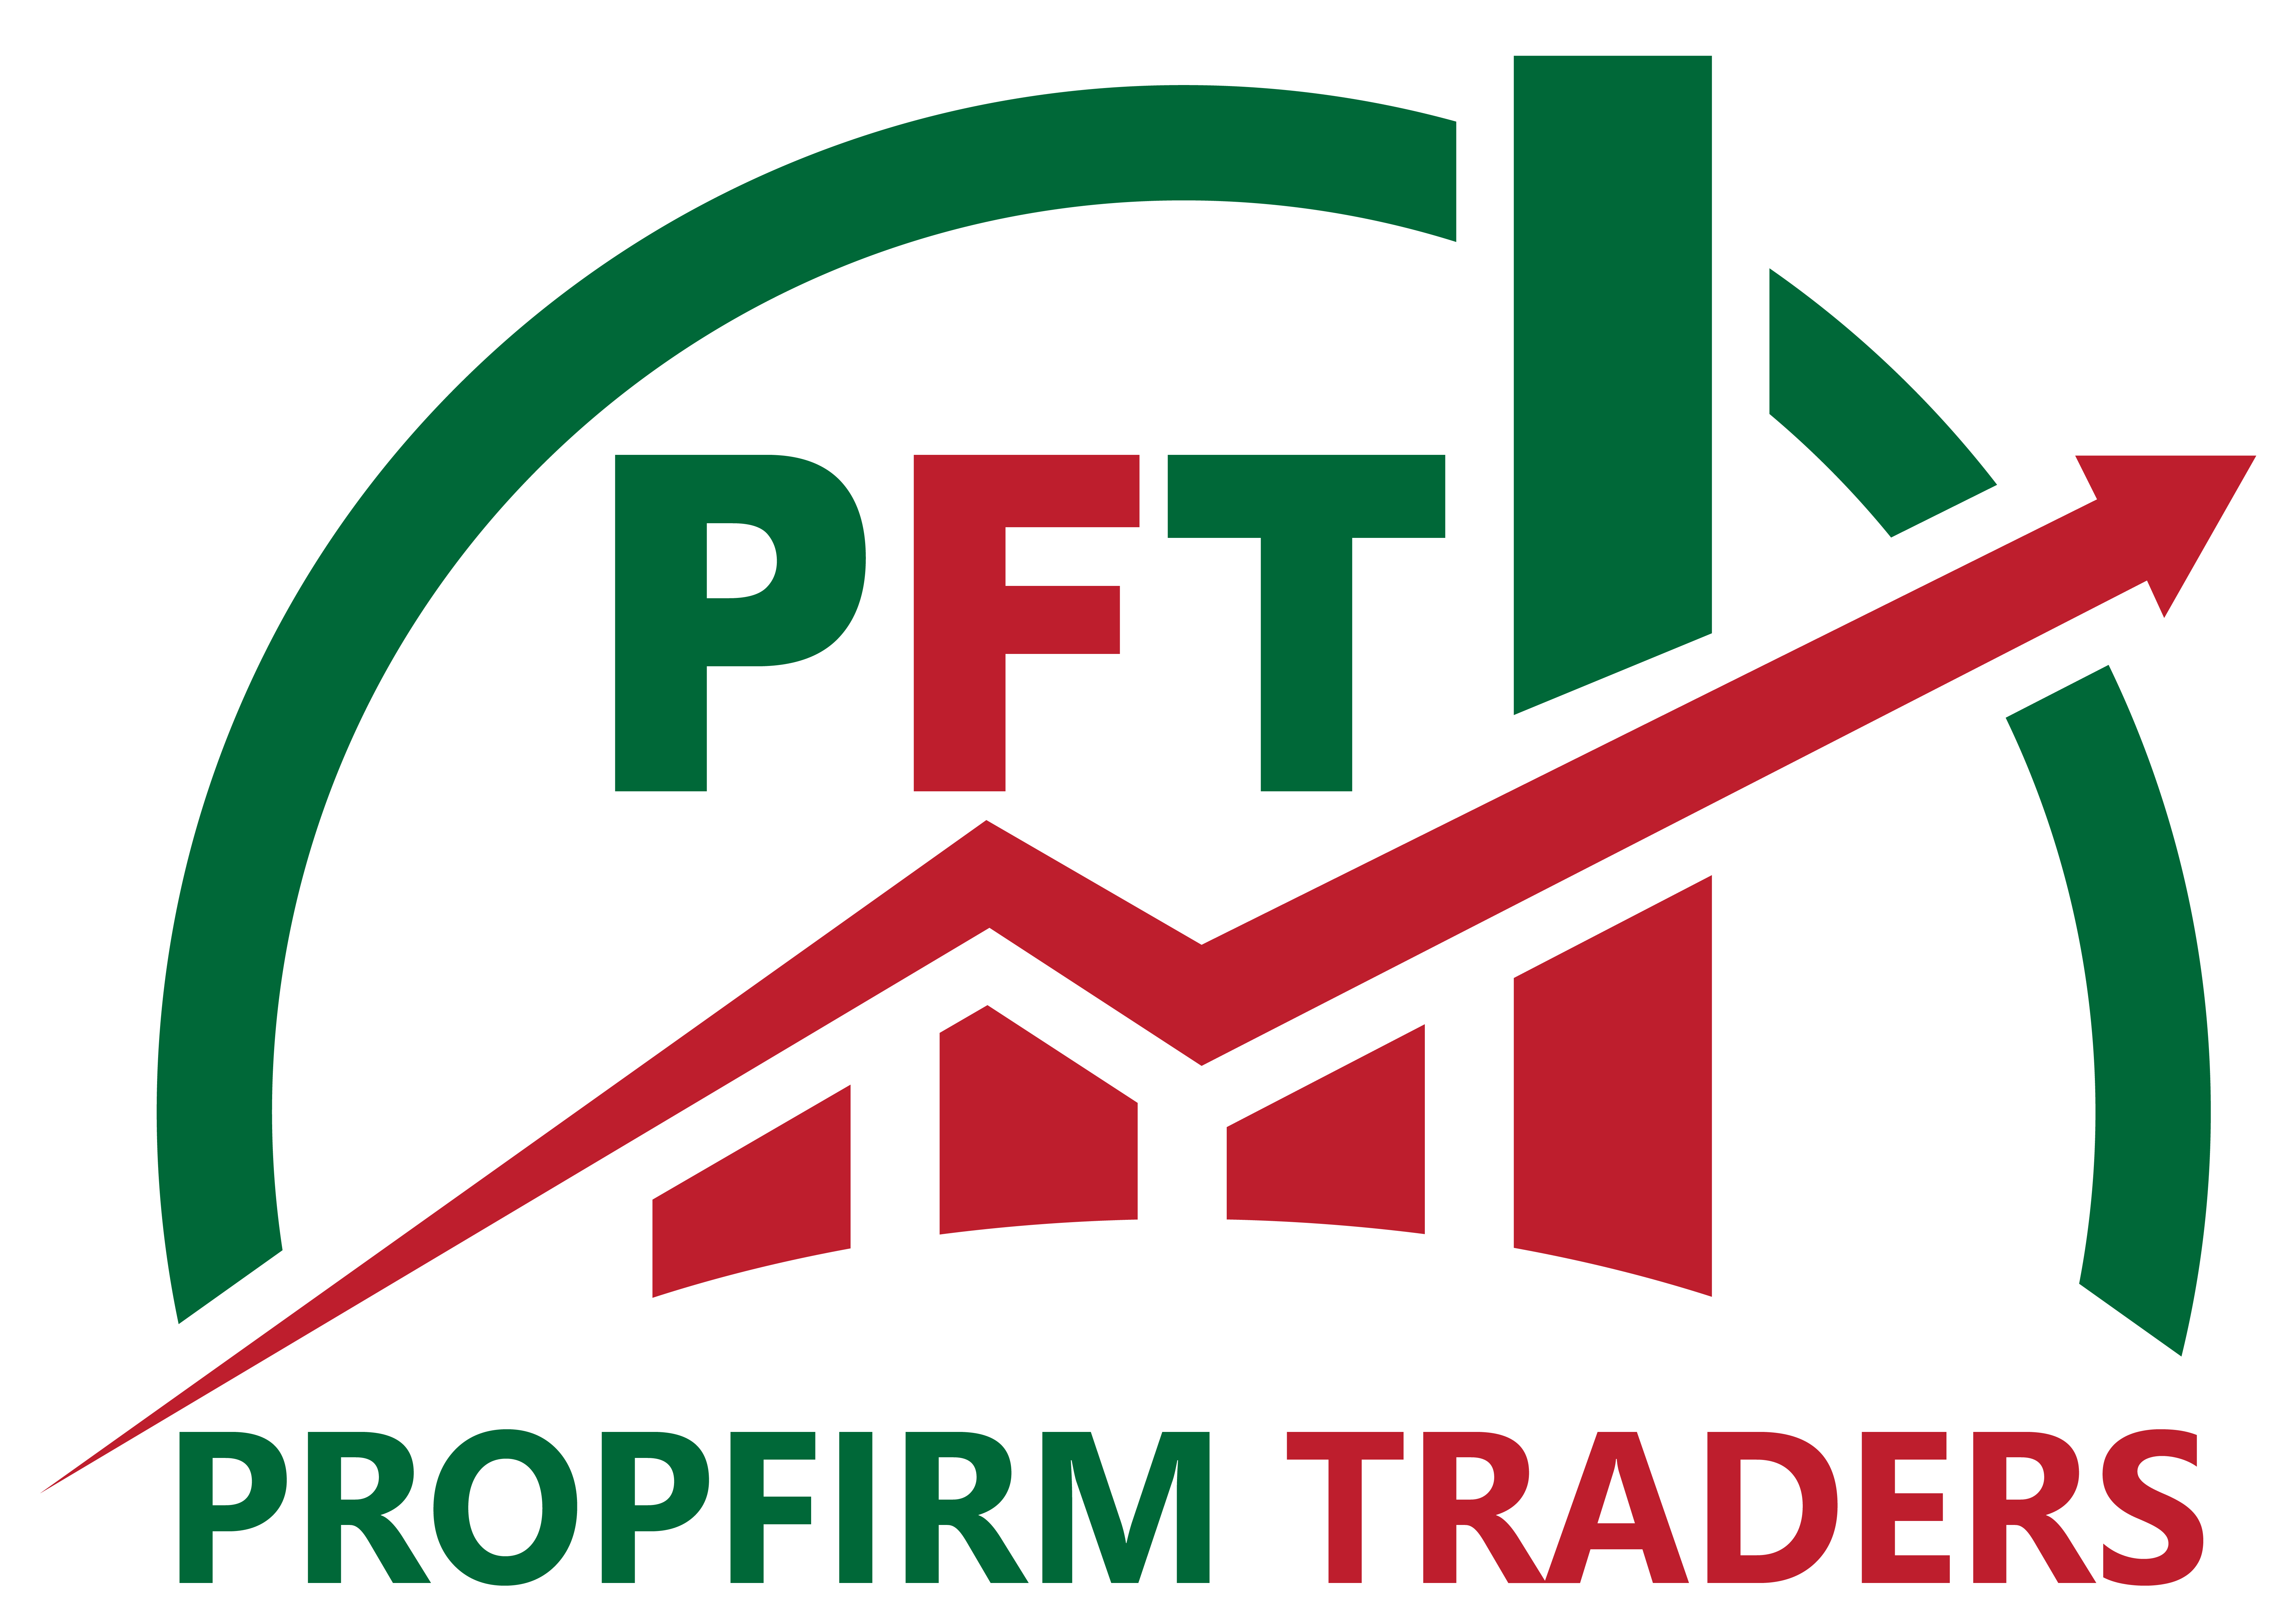 Prop Firm Traders